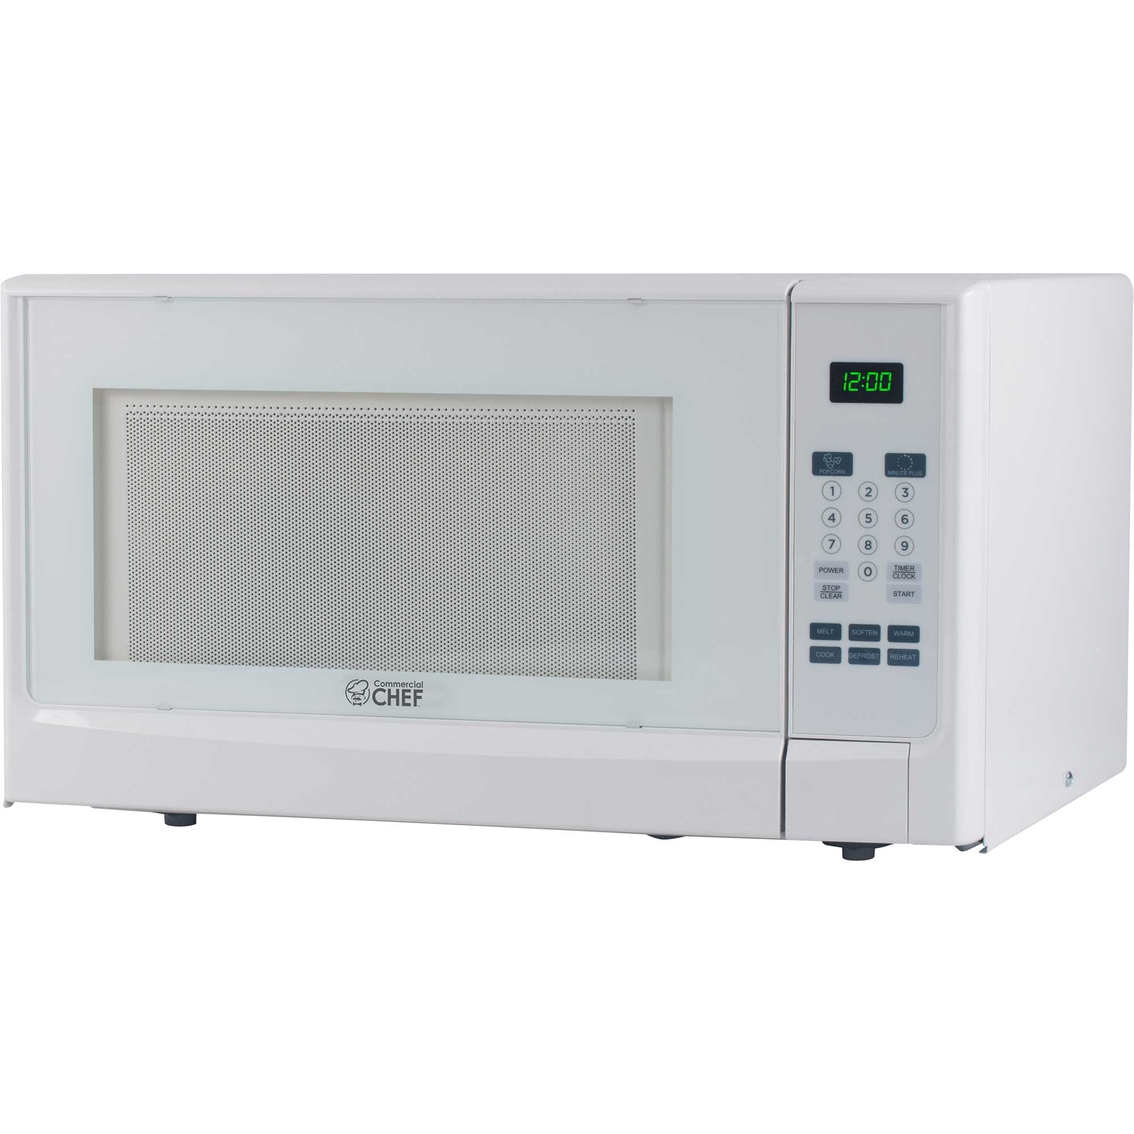 Commercial Chef 1.4 cu. ft. Counter Top Microwave